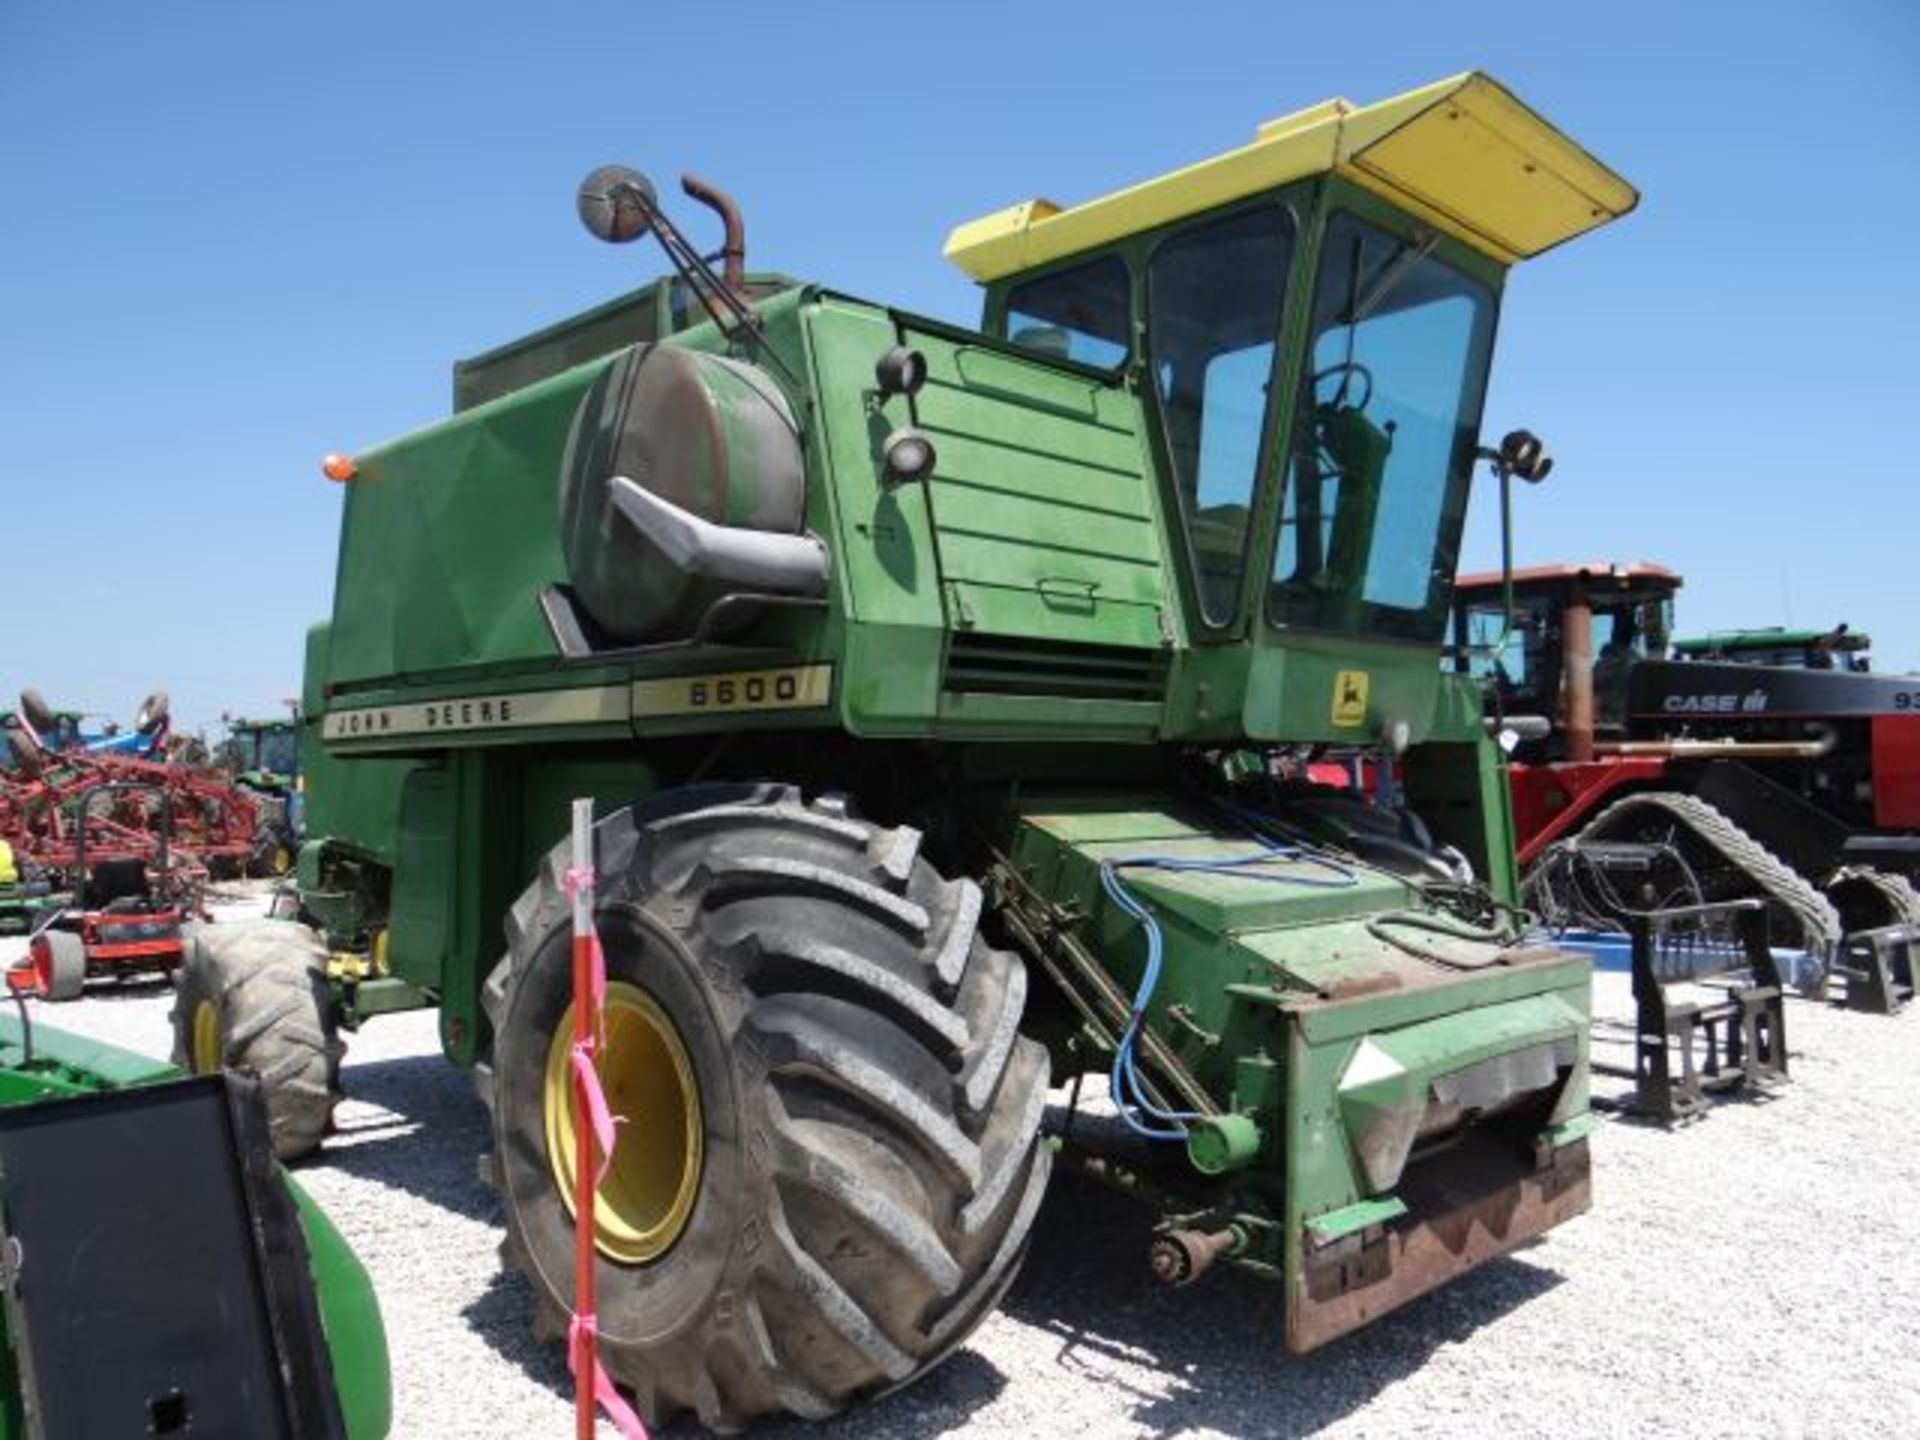 JD 6600 Combine, 1974 5500 hrs, Used in 2015, AC Works Good, New Cylinder Bars in 2012, Feeder House - Image 2 of 3